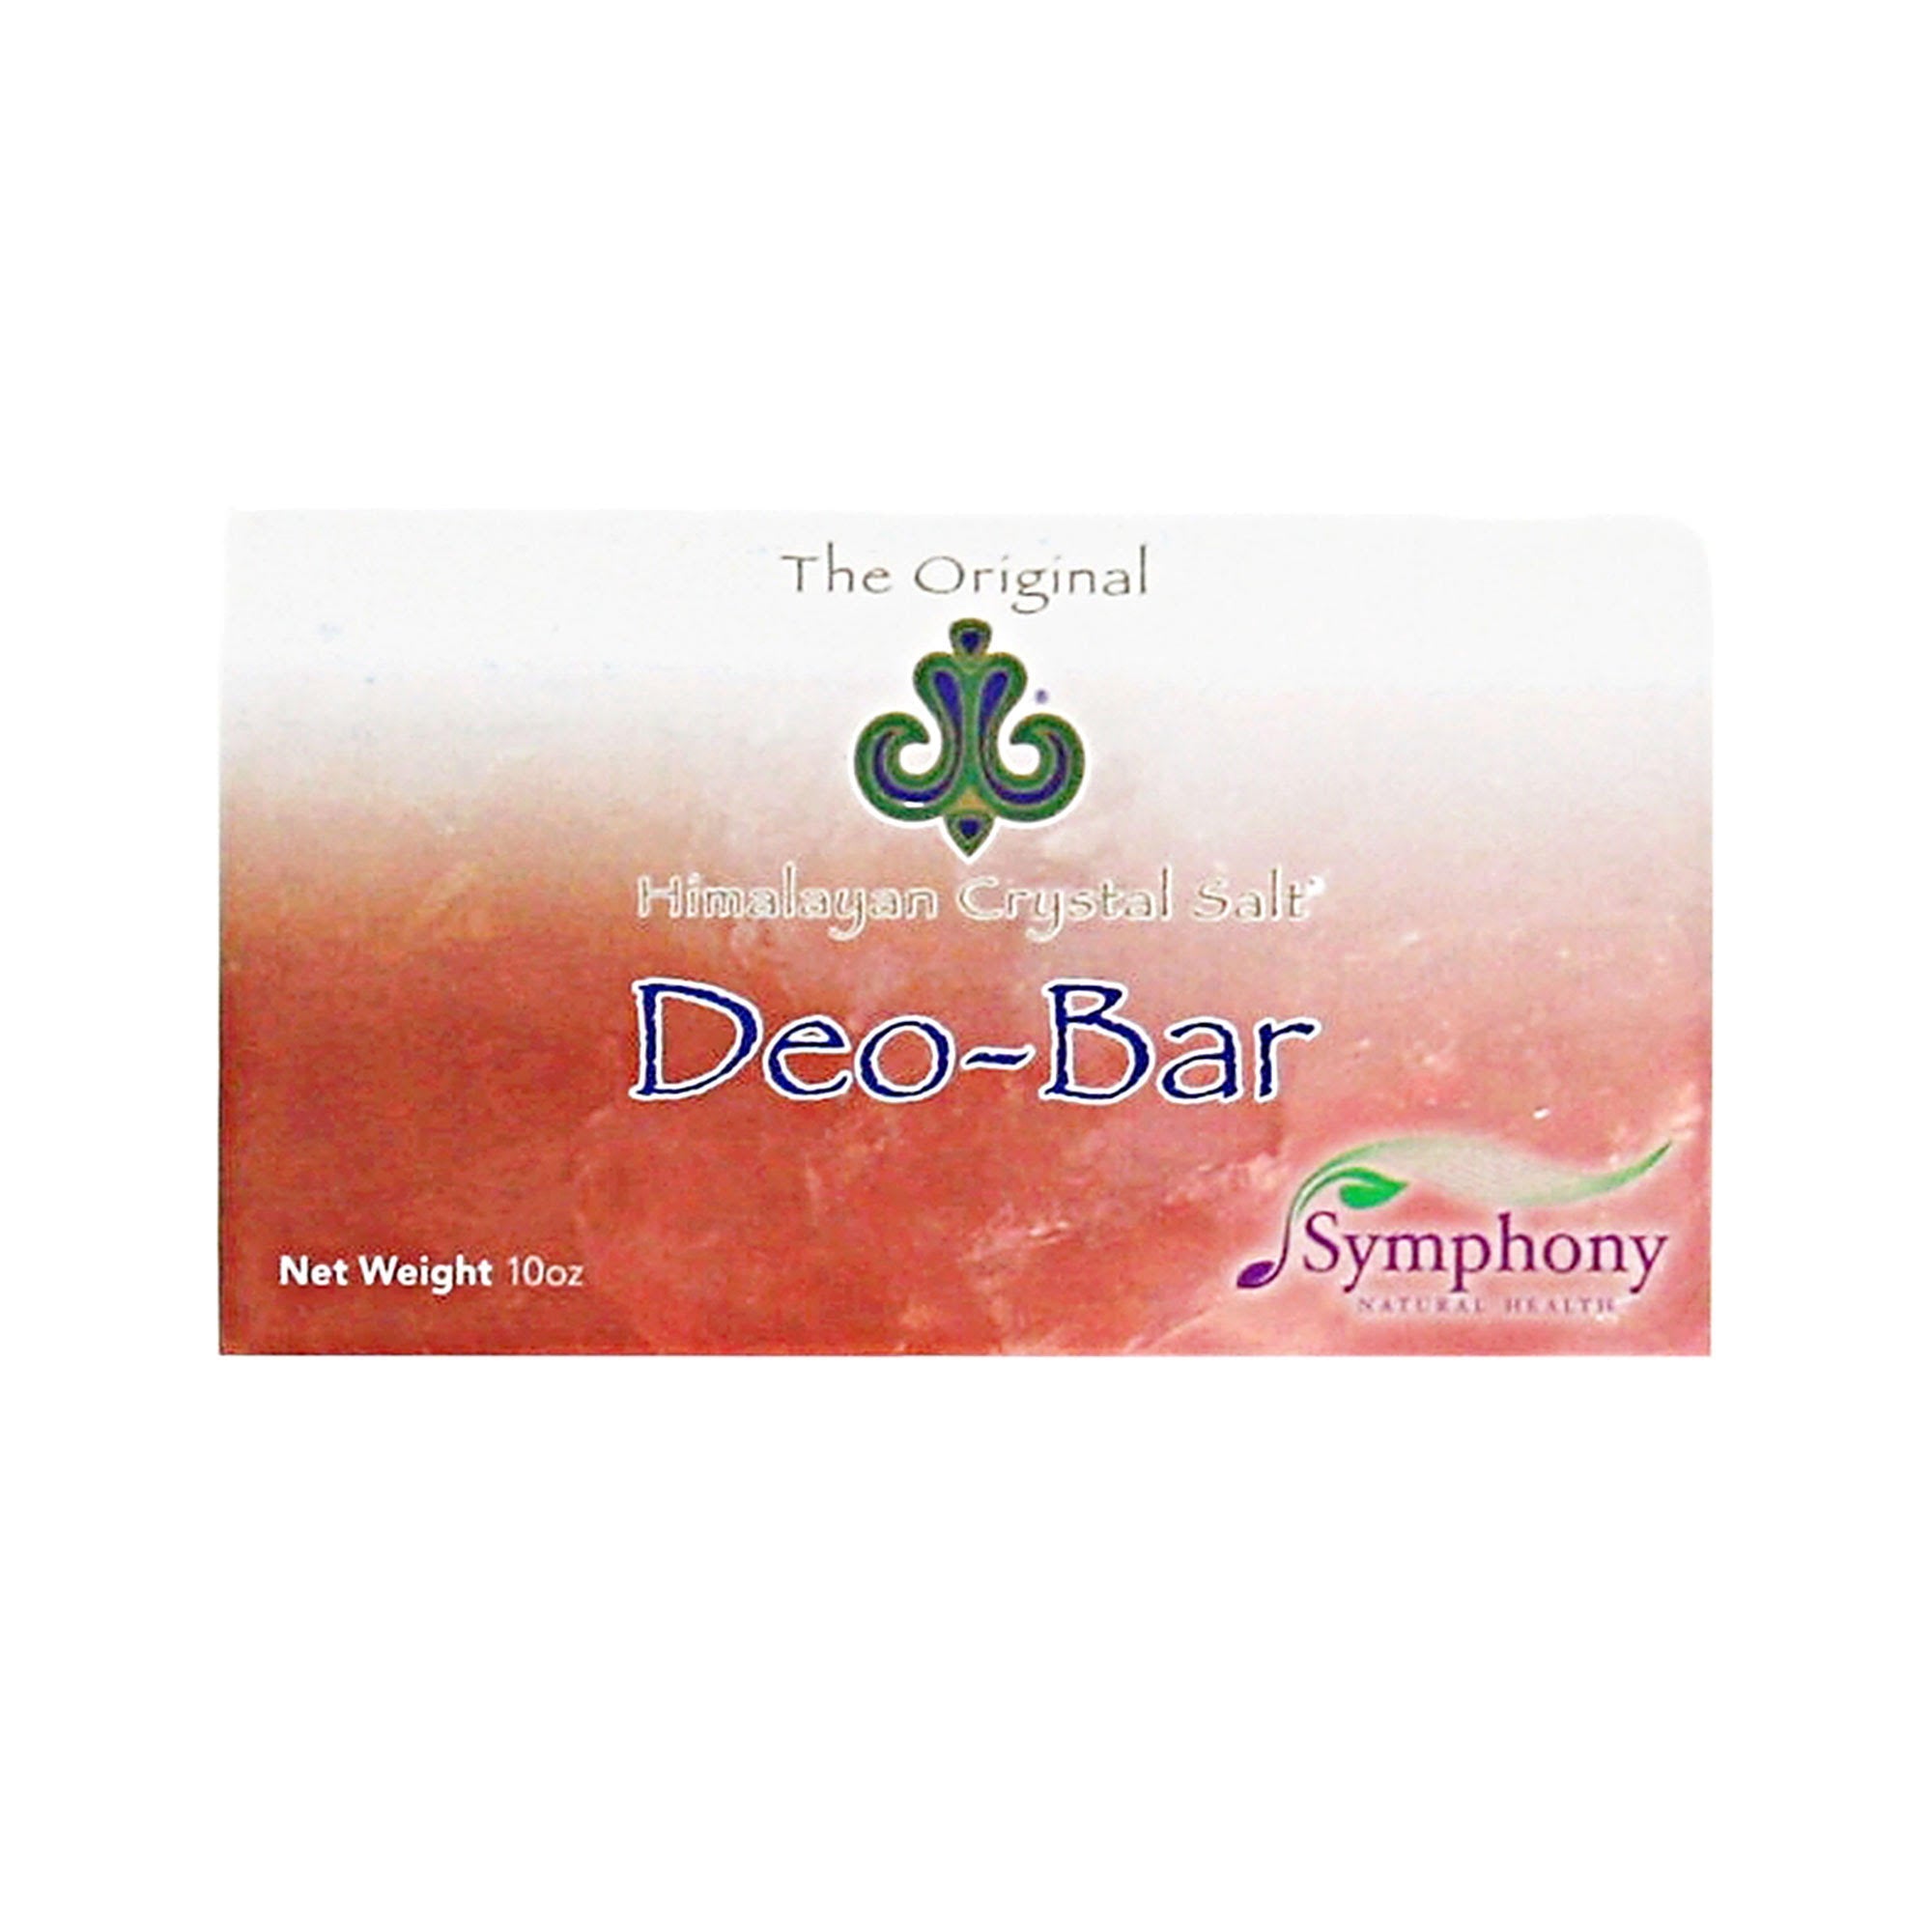 Deo-Bar front-facing product box with enlarged salt stones on front, and himalayan crystal salt logo